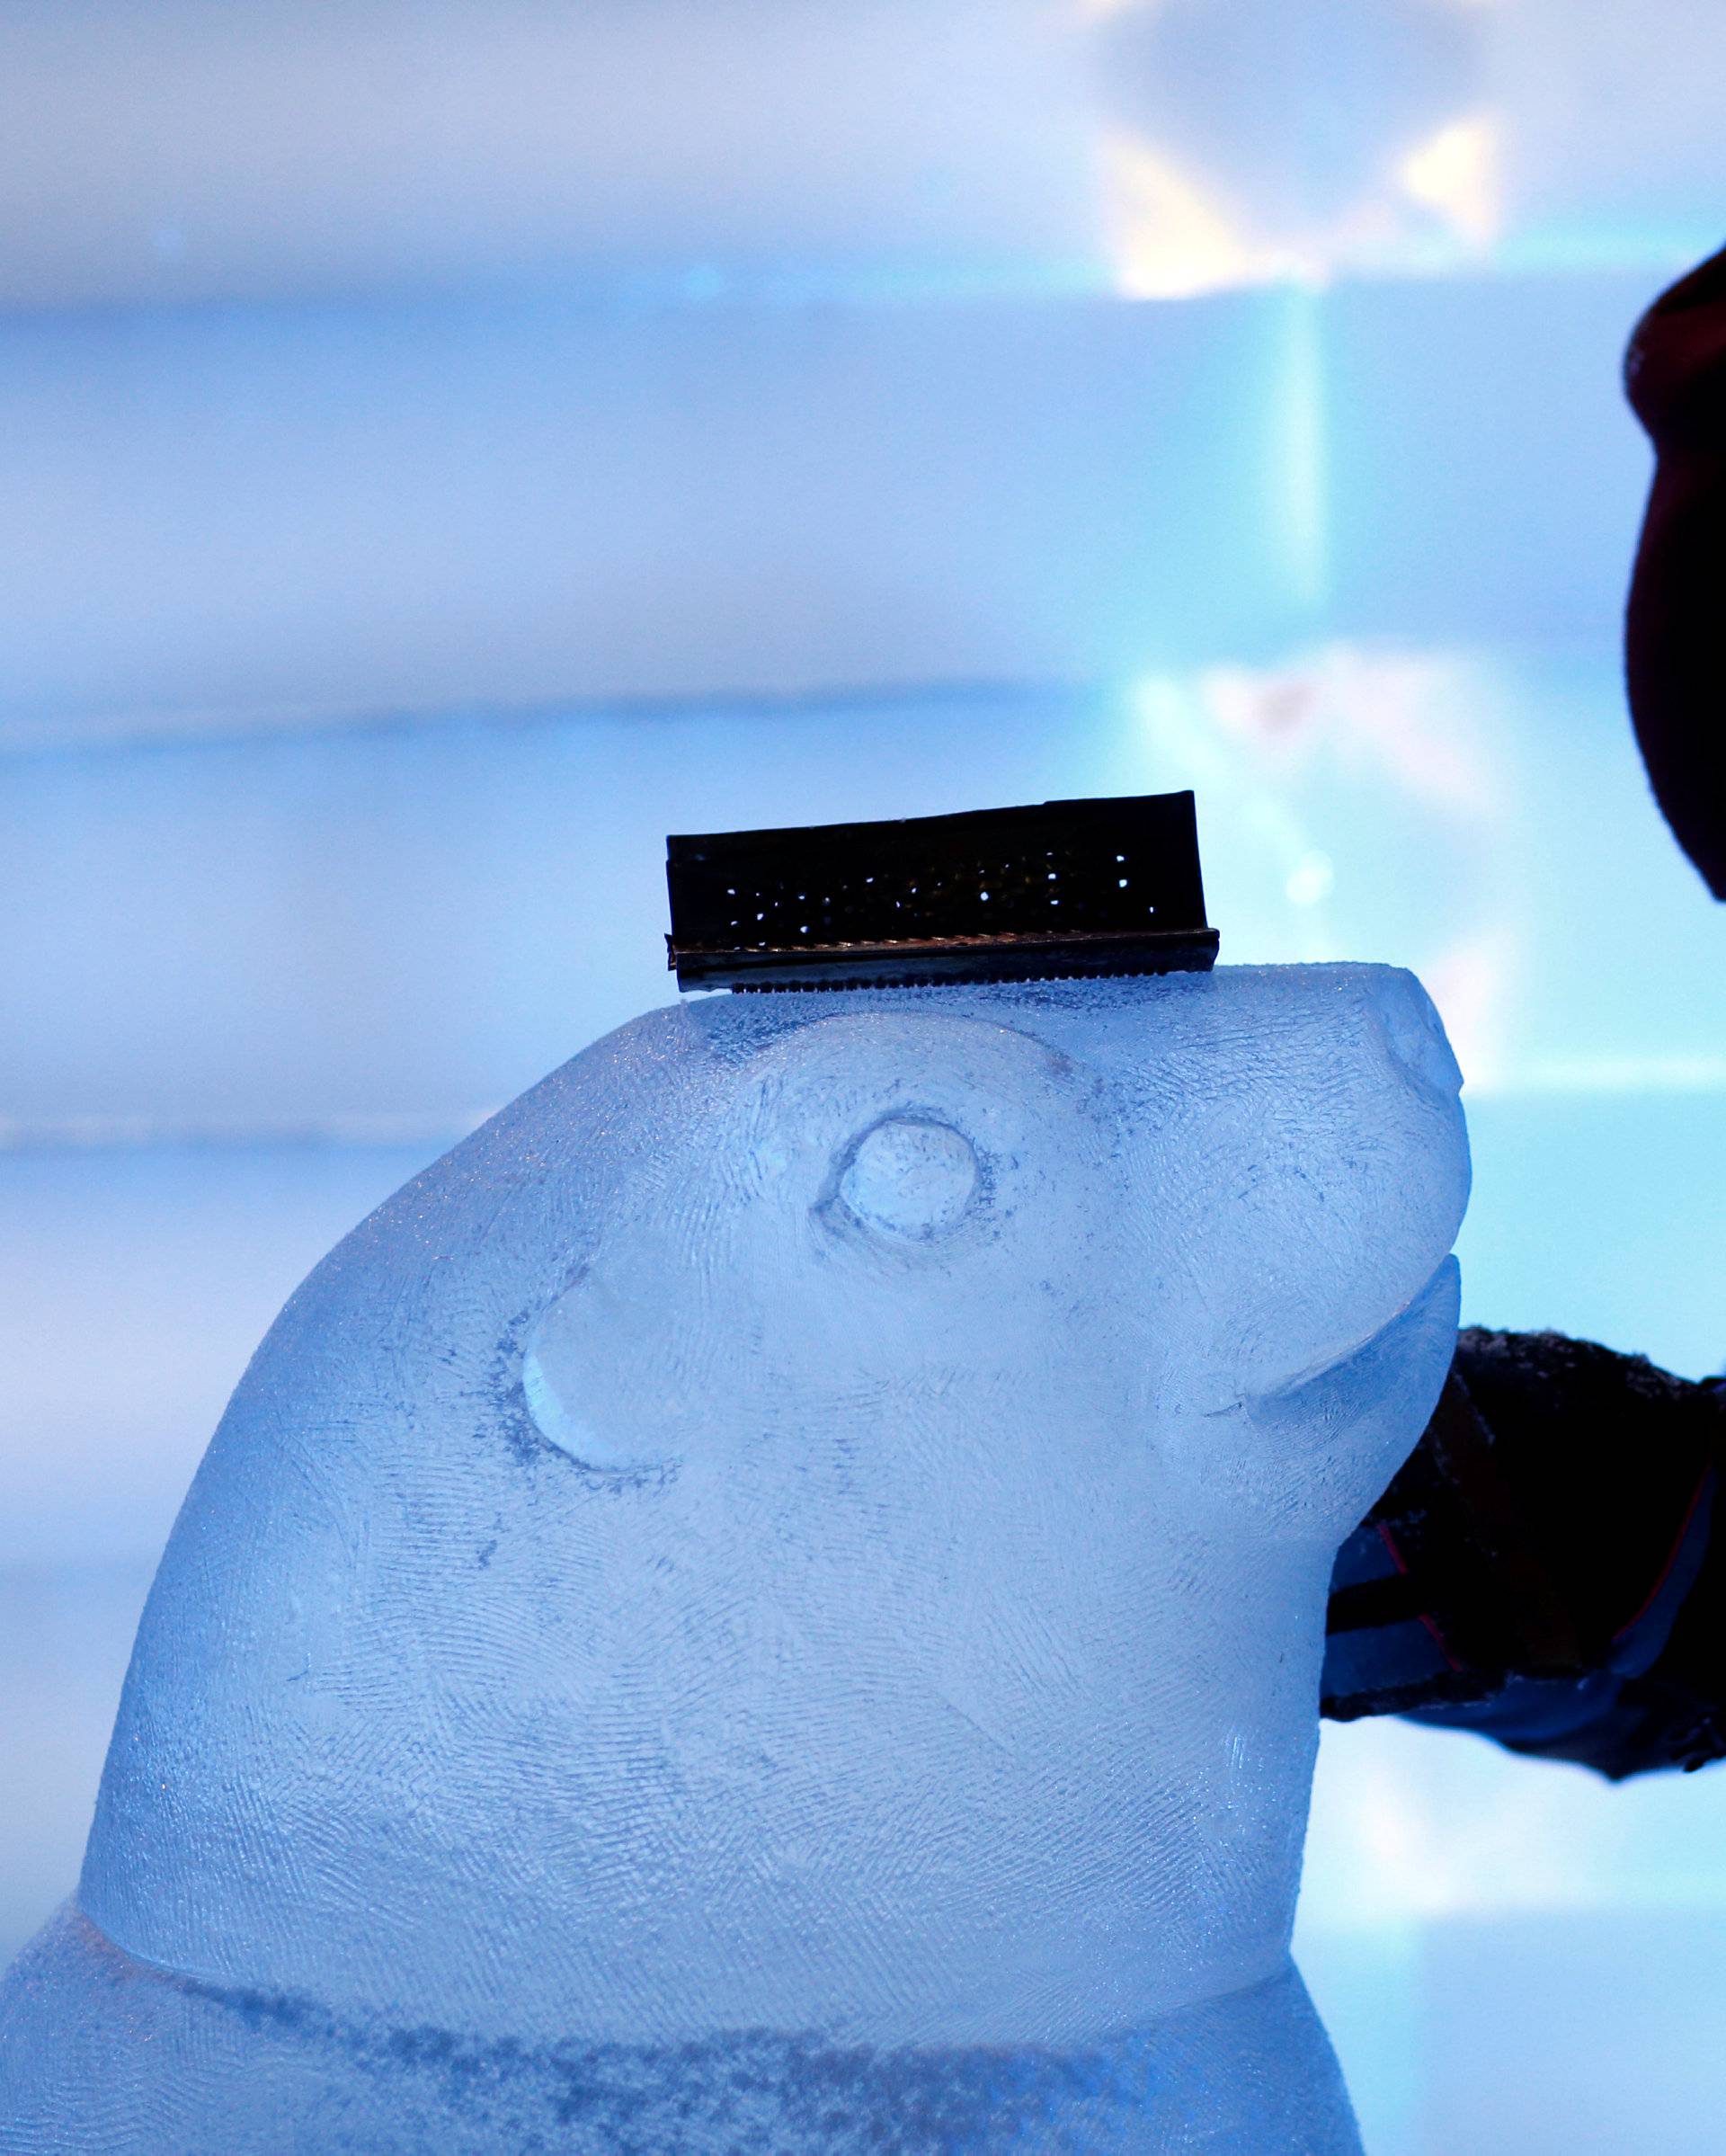 A sculptor carves a sculpture depicting a seal at the Snow and Ice Sculpture Festival "Eiswelt Mainz" in Mainz